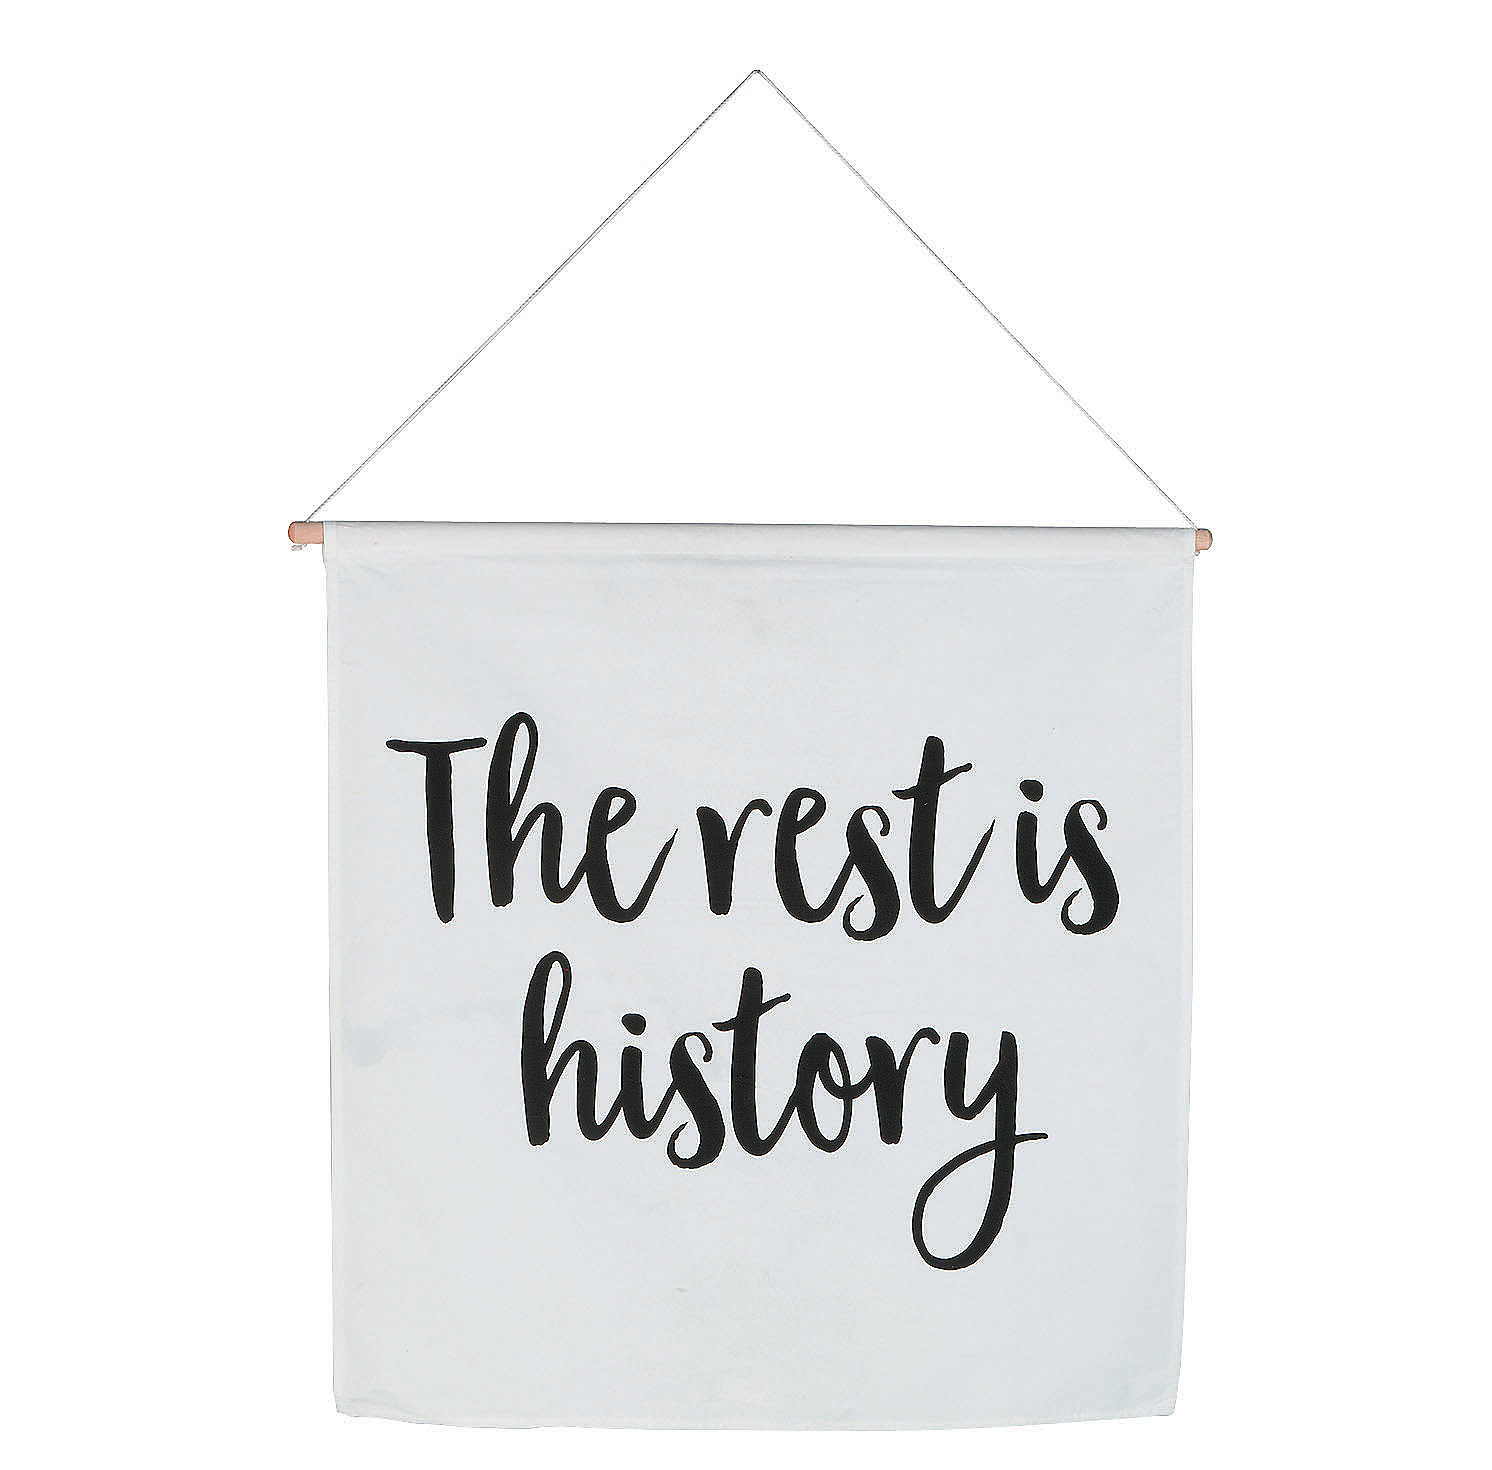 NEW "The Rest Is History" Wedding Banner 3 ft, cotton, white w/ wooden dowel - $10.95